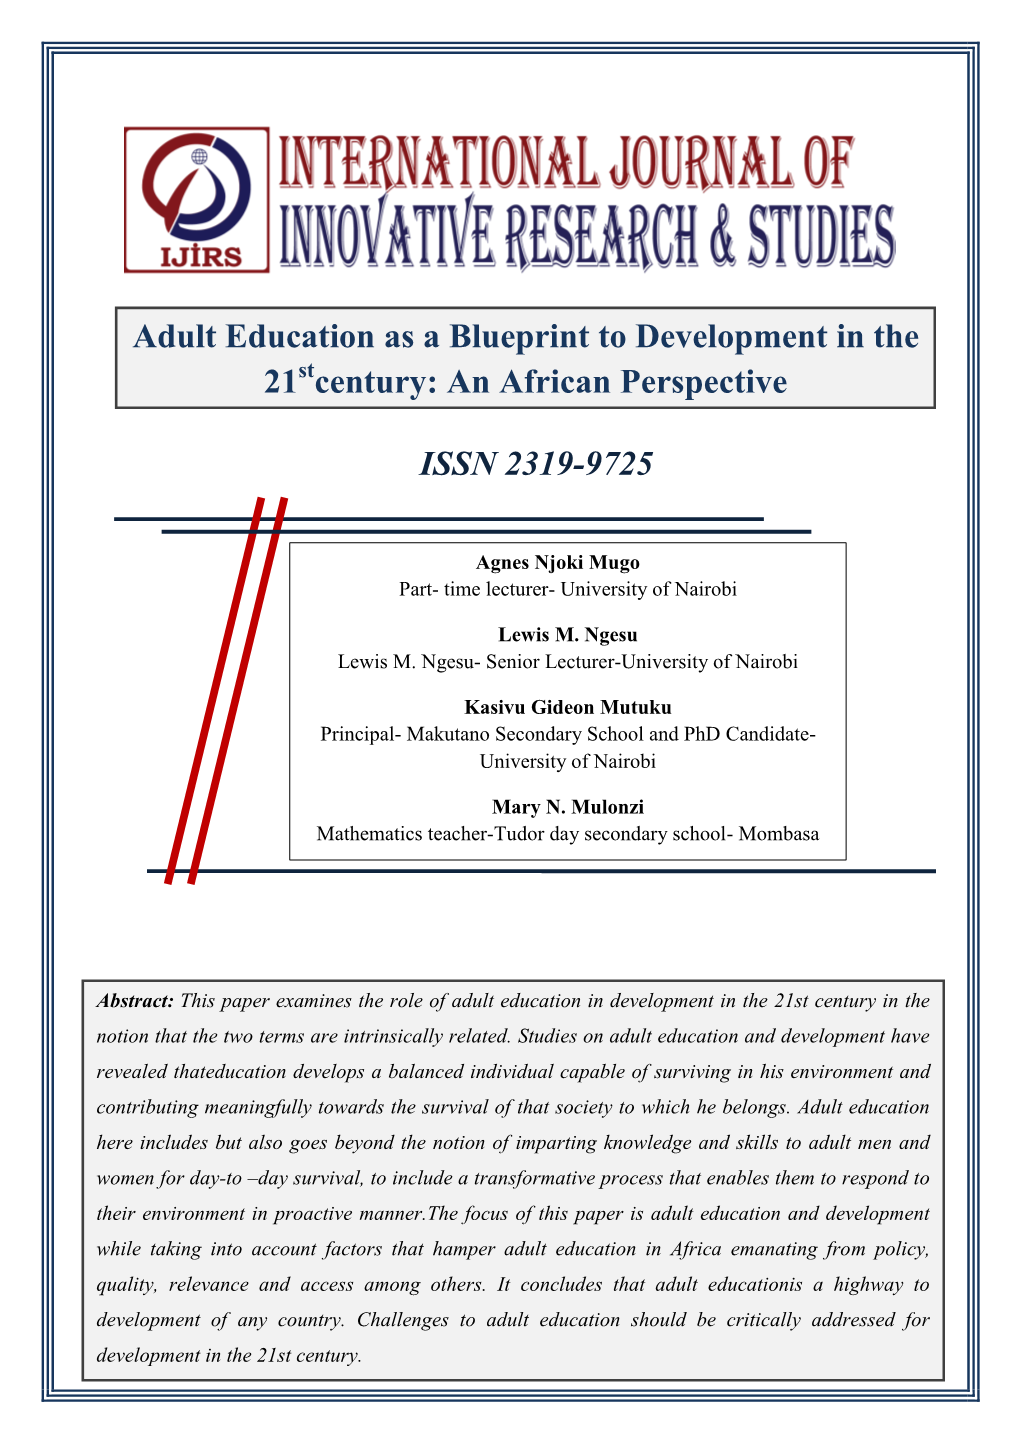 Adult Education As a Blueprint to Development in the St 21 Century: an African Perspective